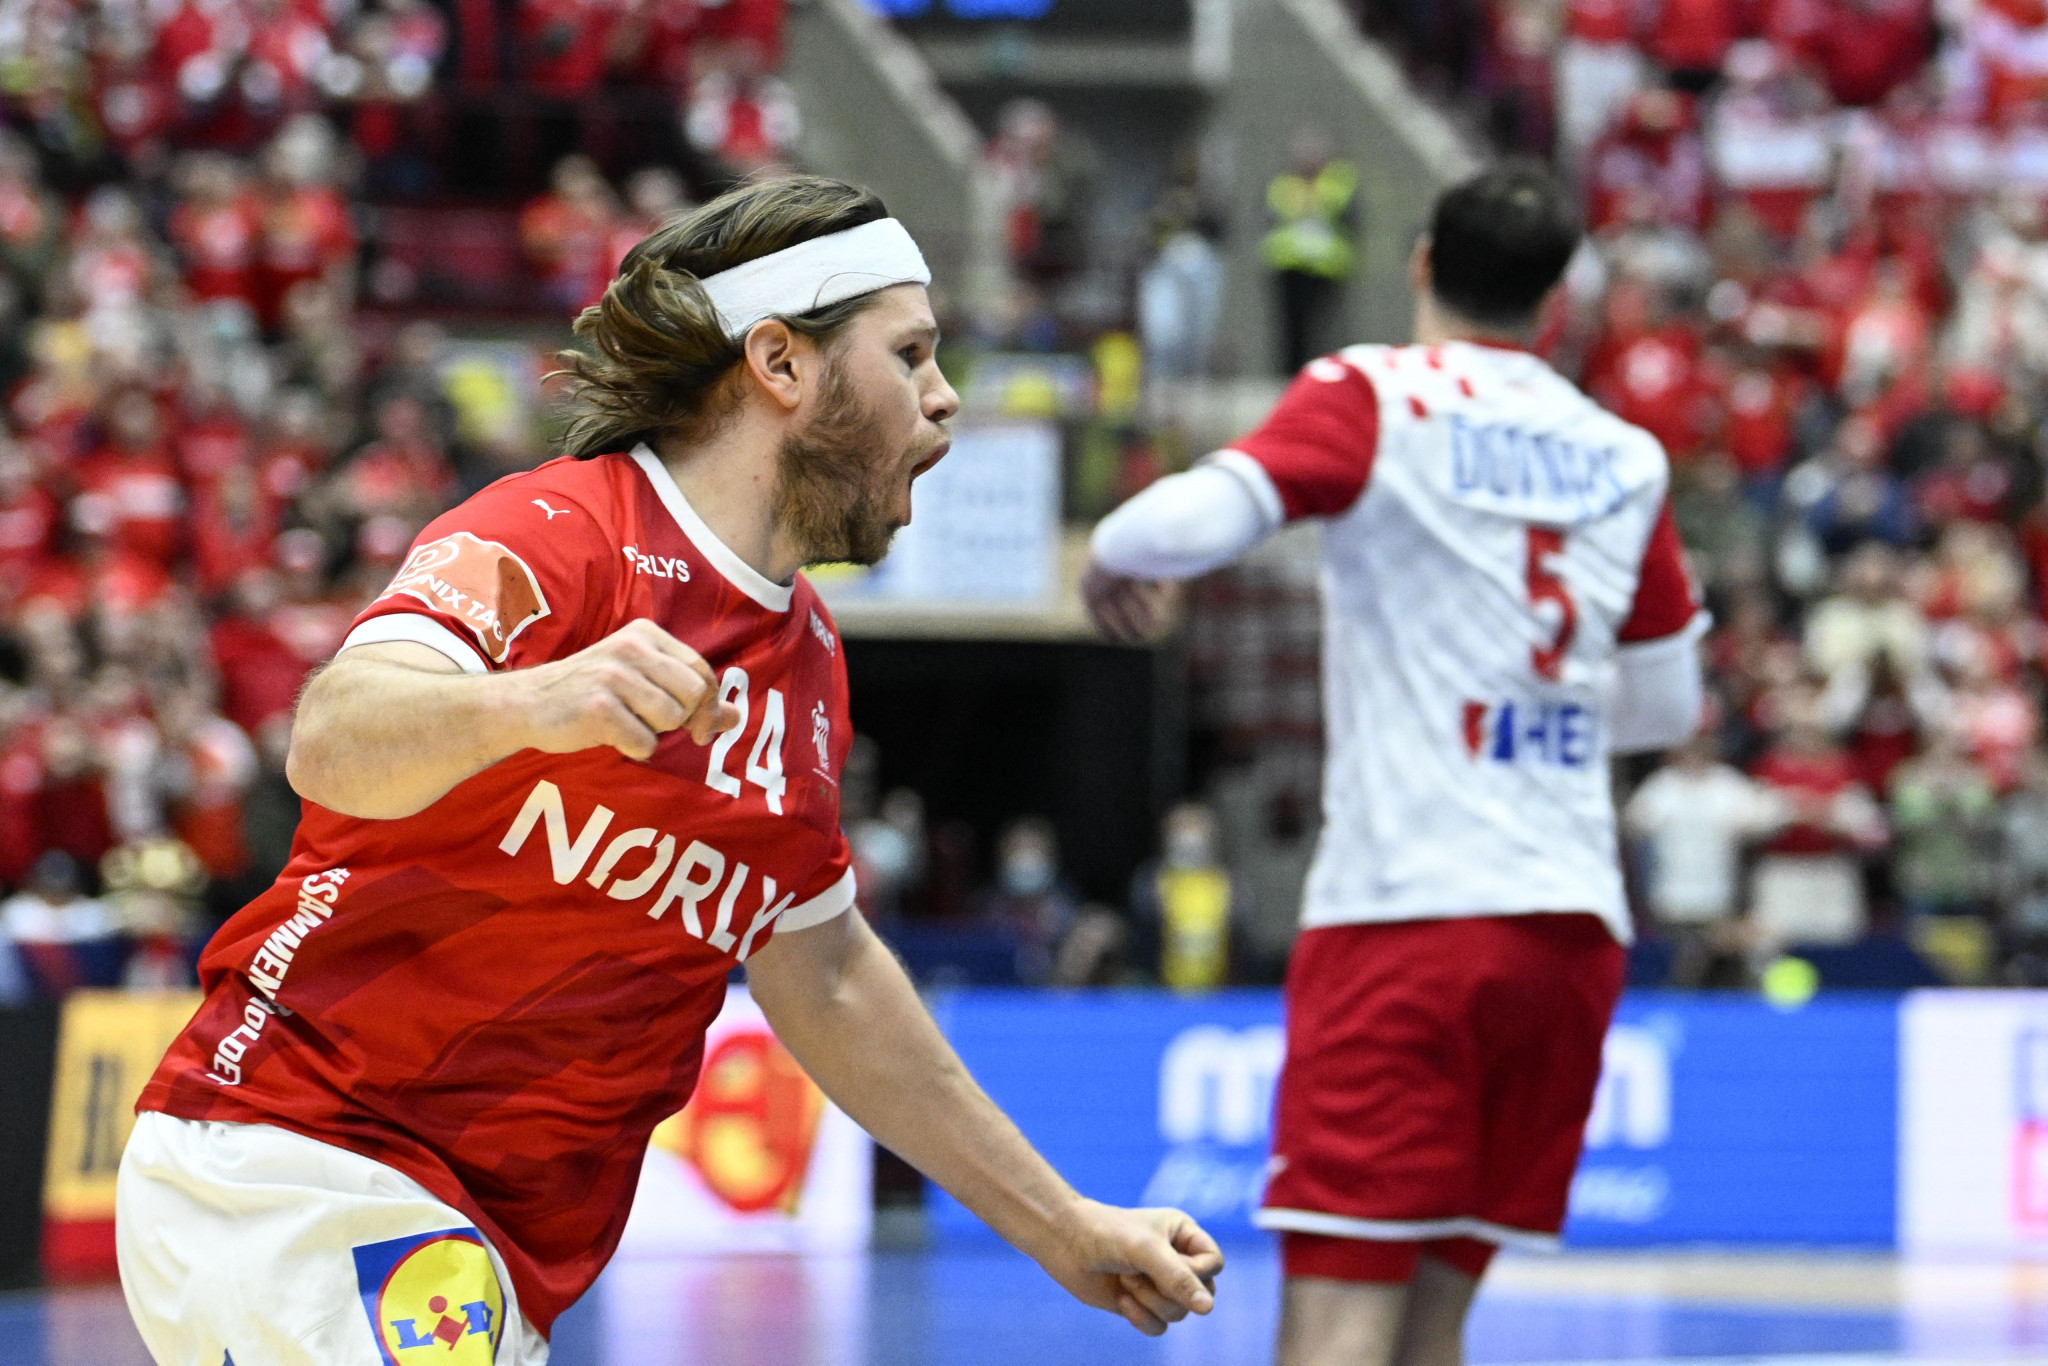 Holders Denmark held to draw as main round of IHF Men’s World Championship continues